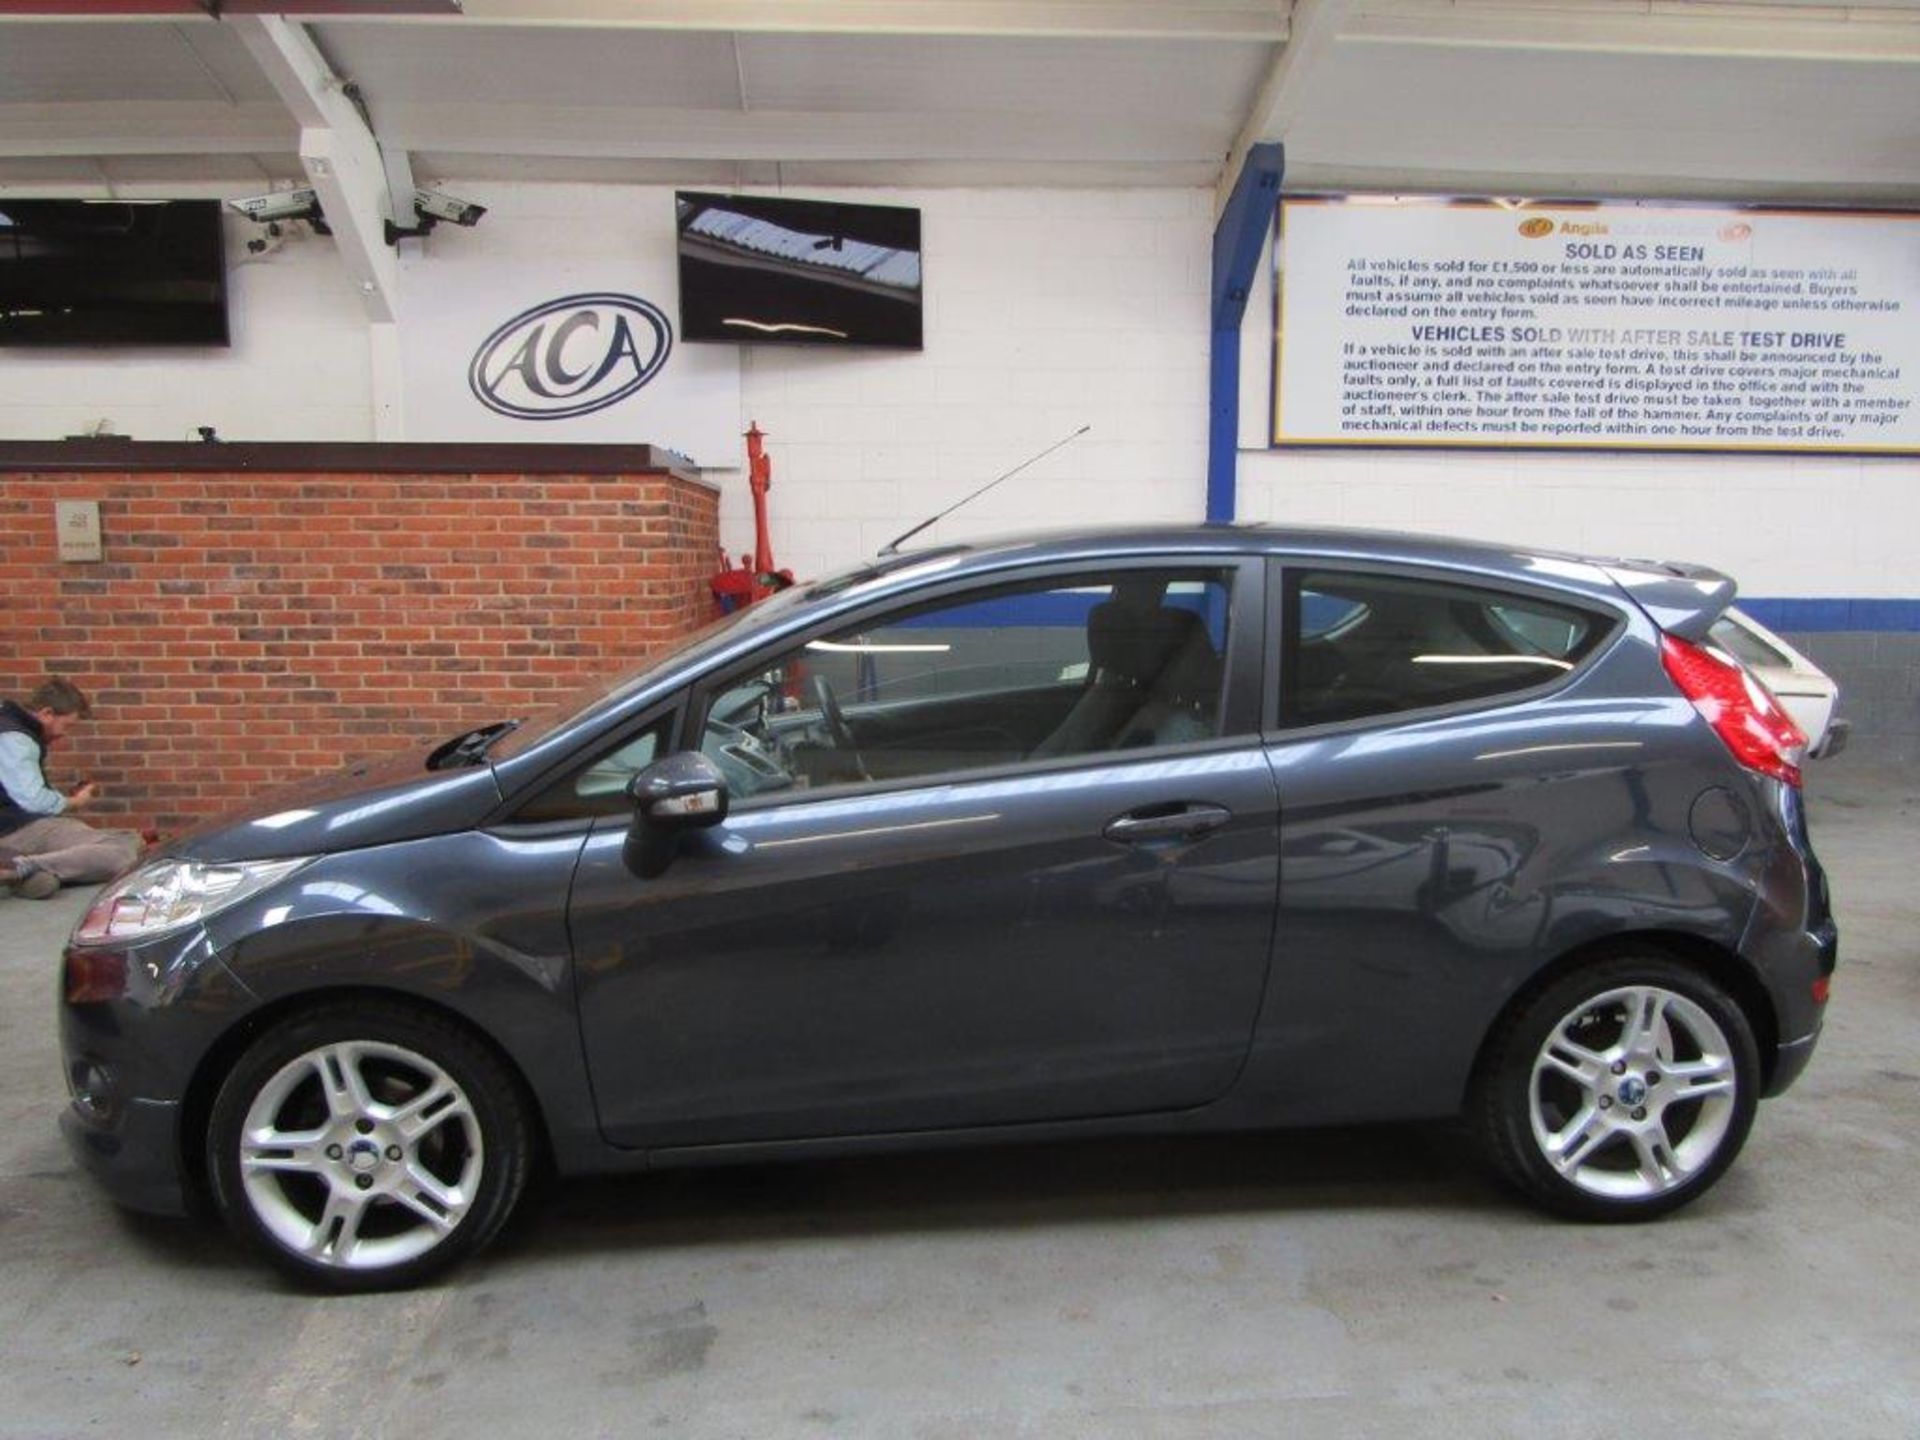 09 09 Ford Fiesta - Image 2 of 21